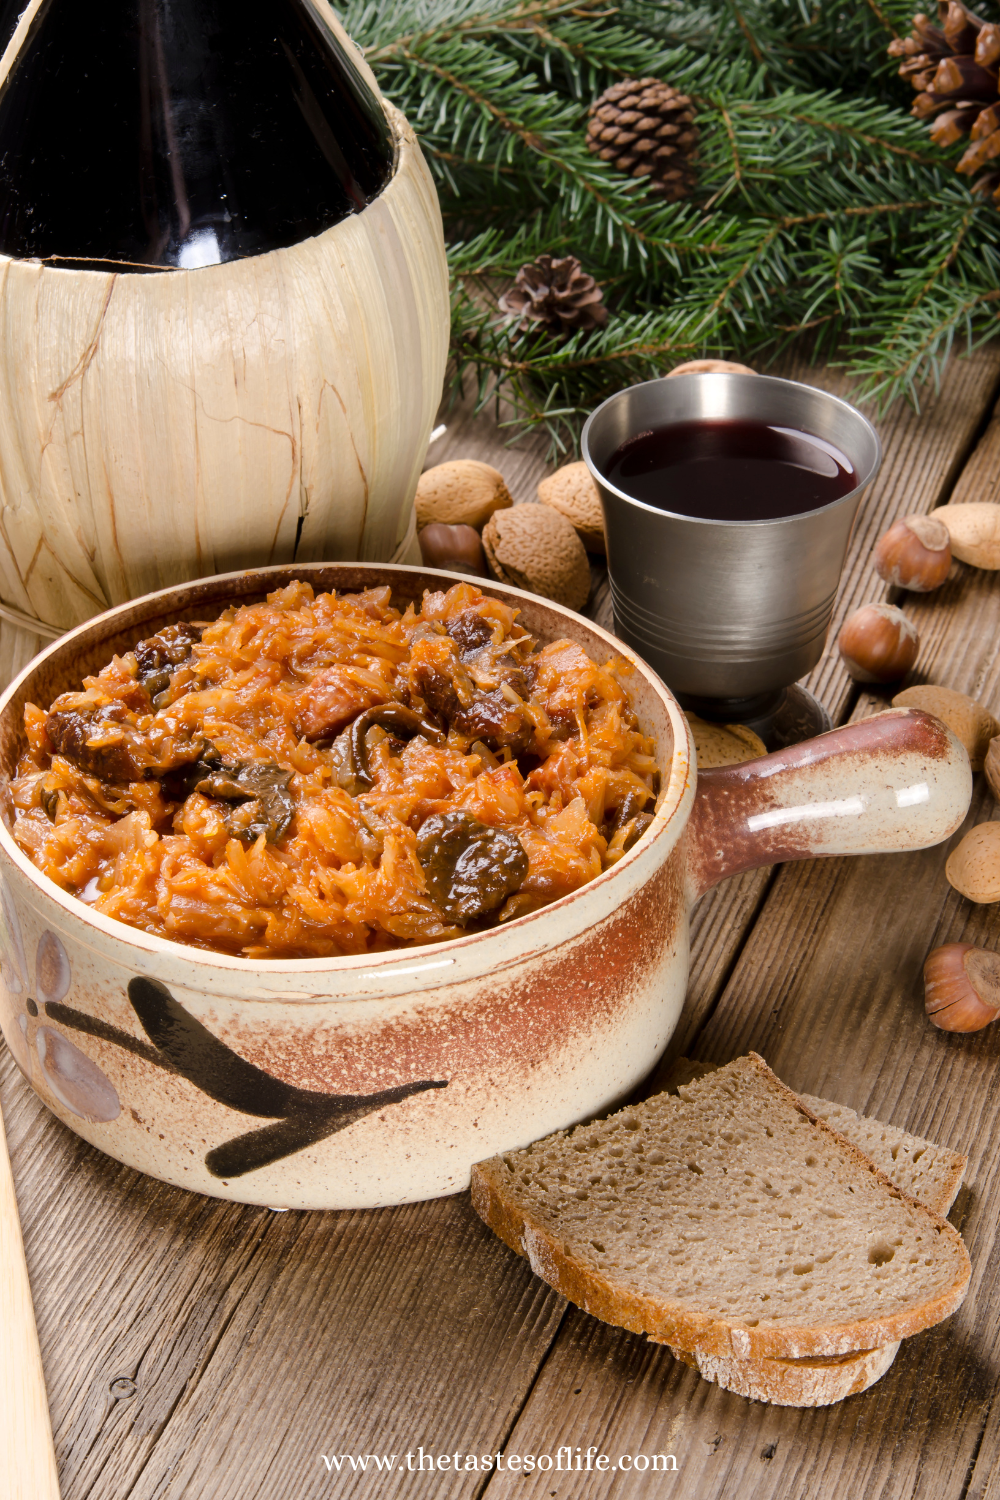 Savoring Tradition: Exploring the Rich Heritage of Authentic Polish Hunter Stew